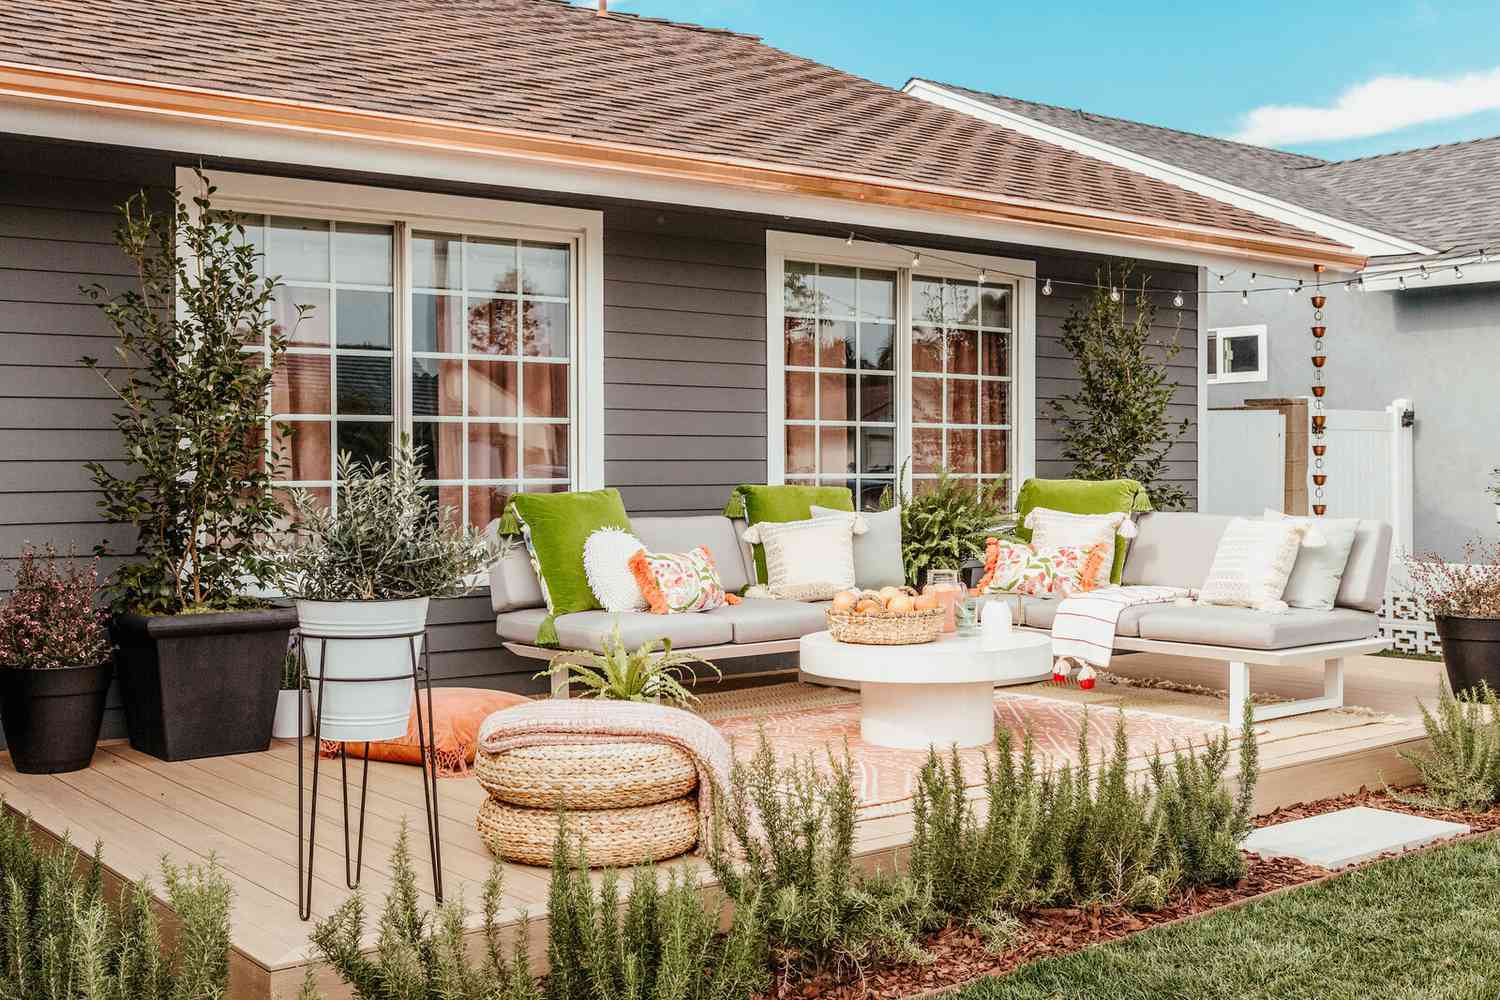 ttly outdoor living spaces